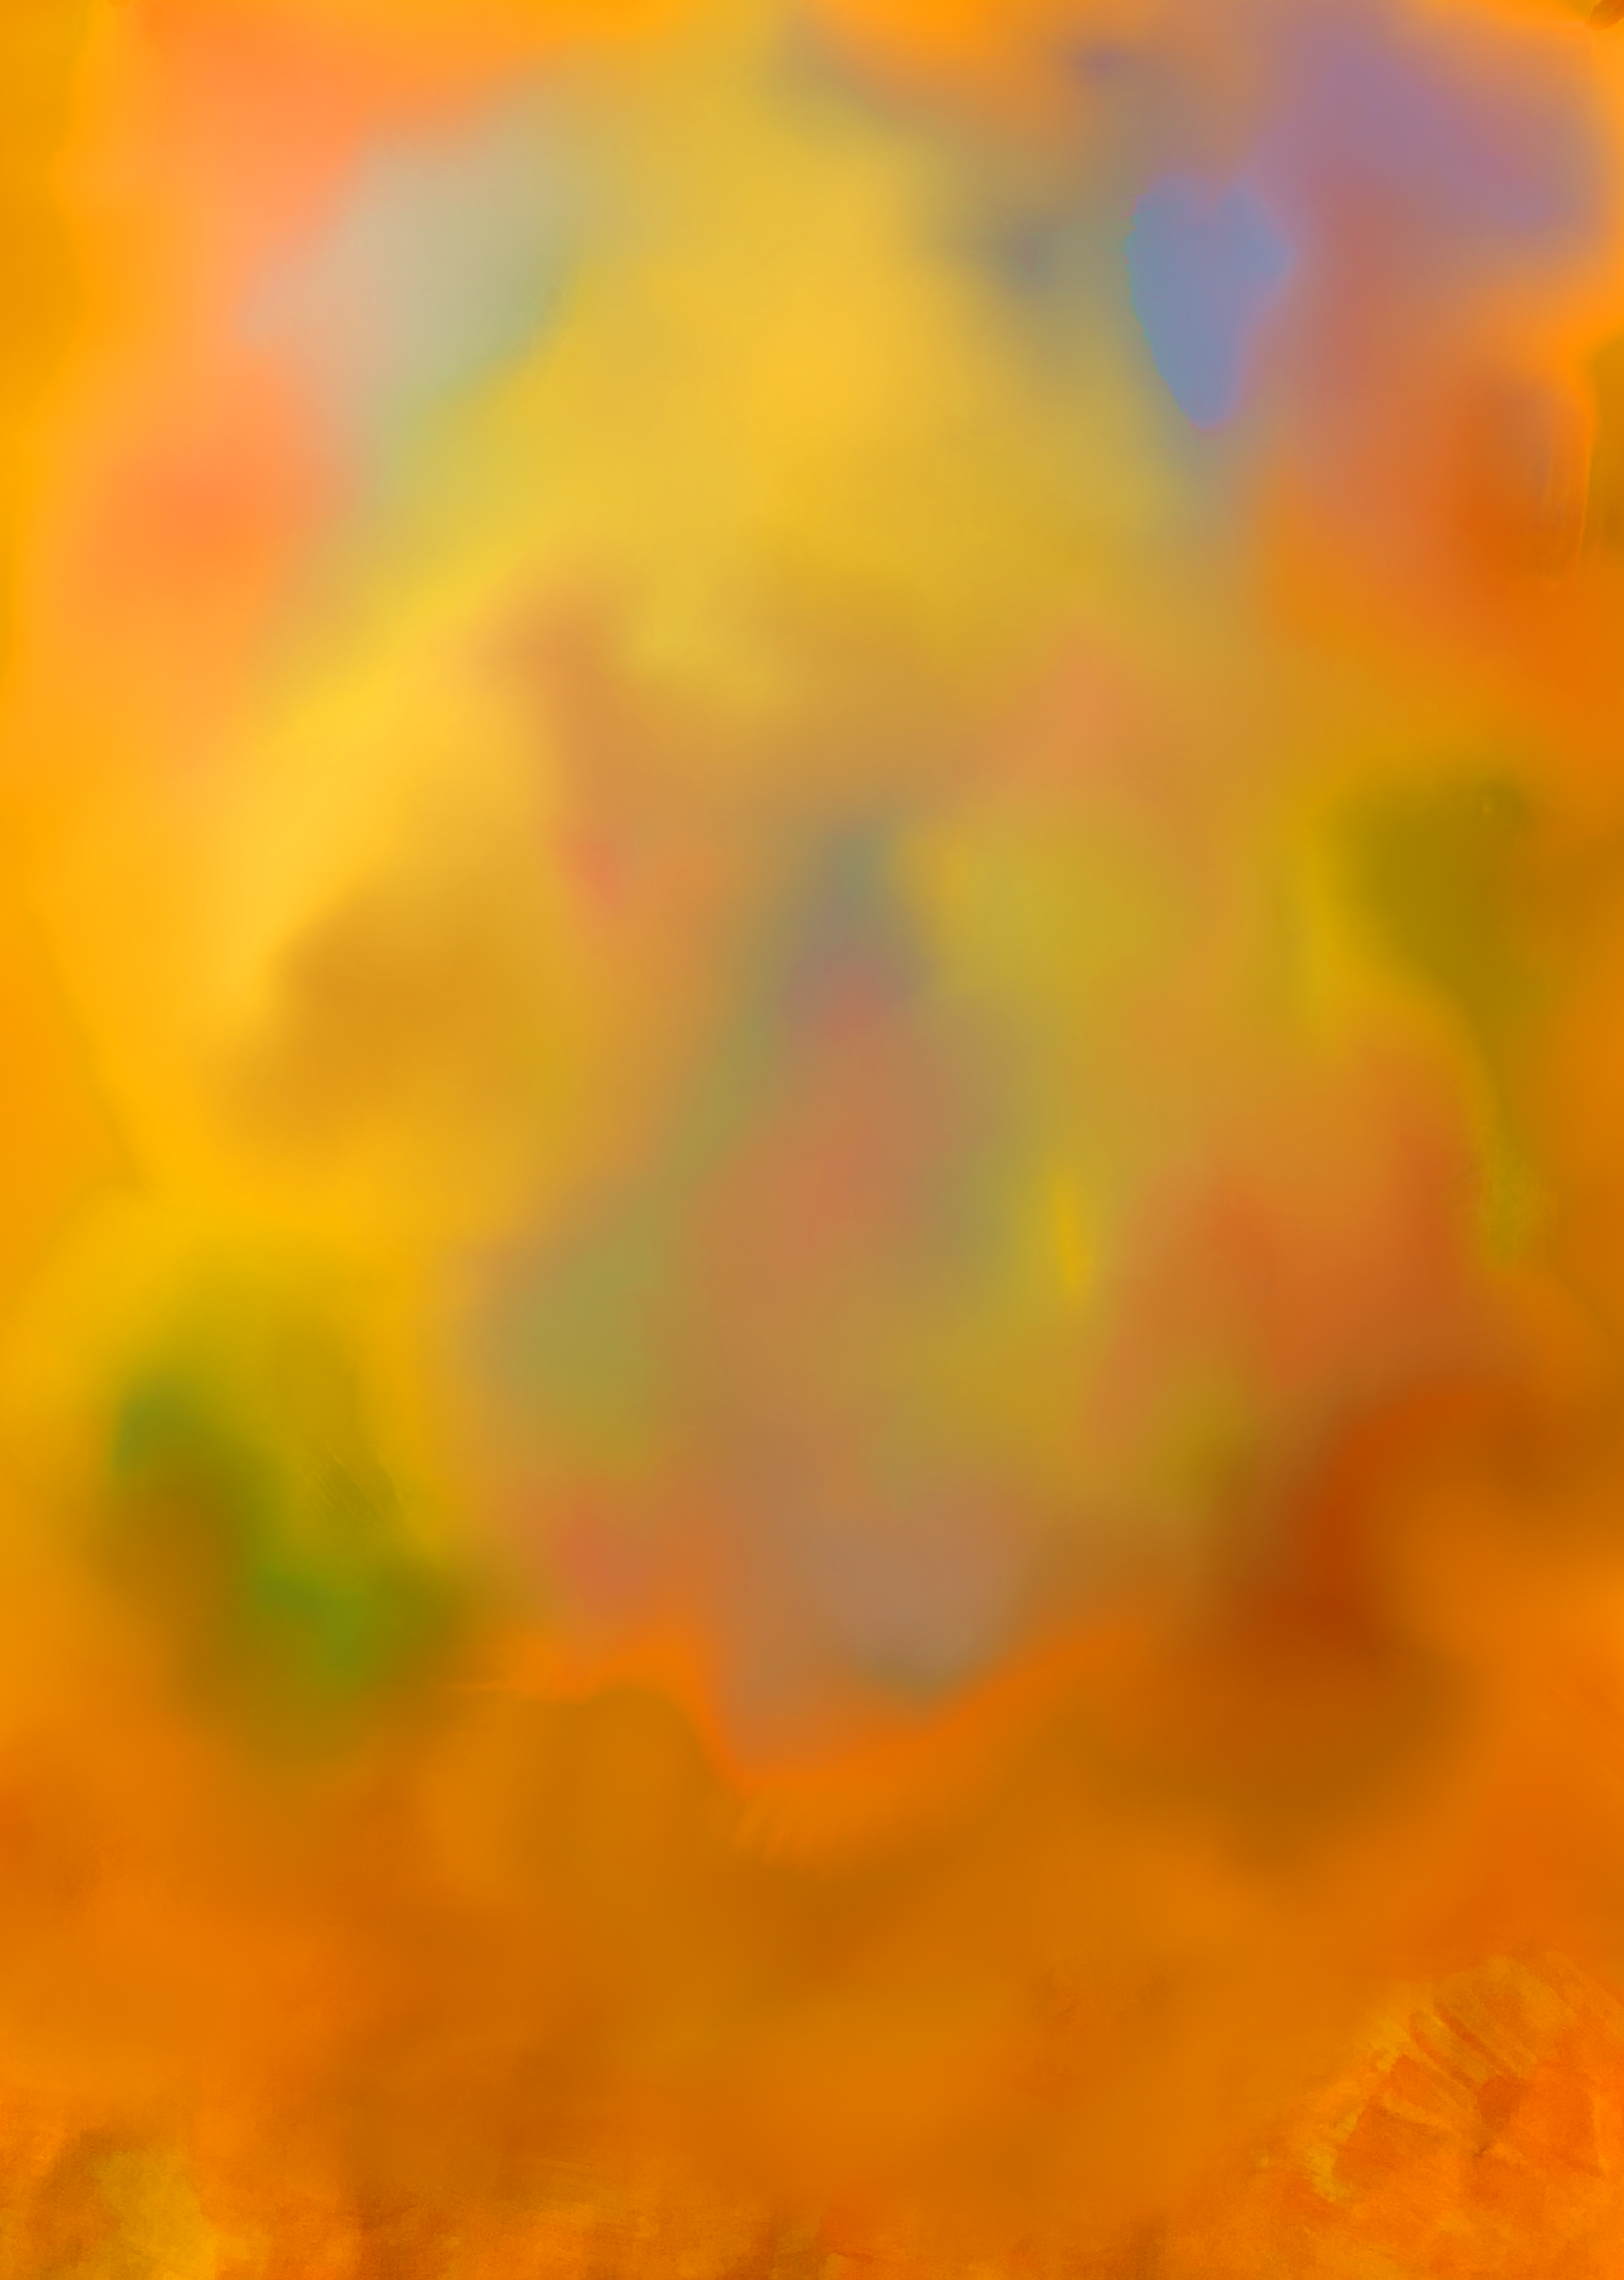 colorful image with shades of orange, blue, green, and yellow